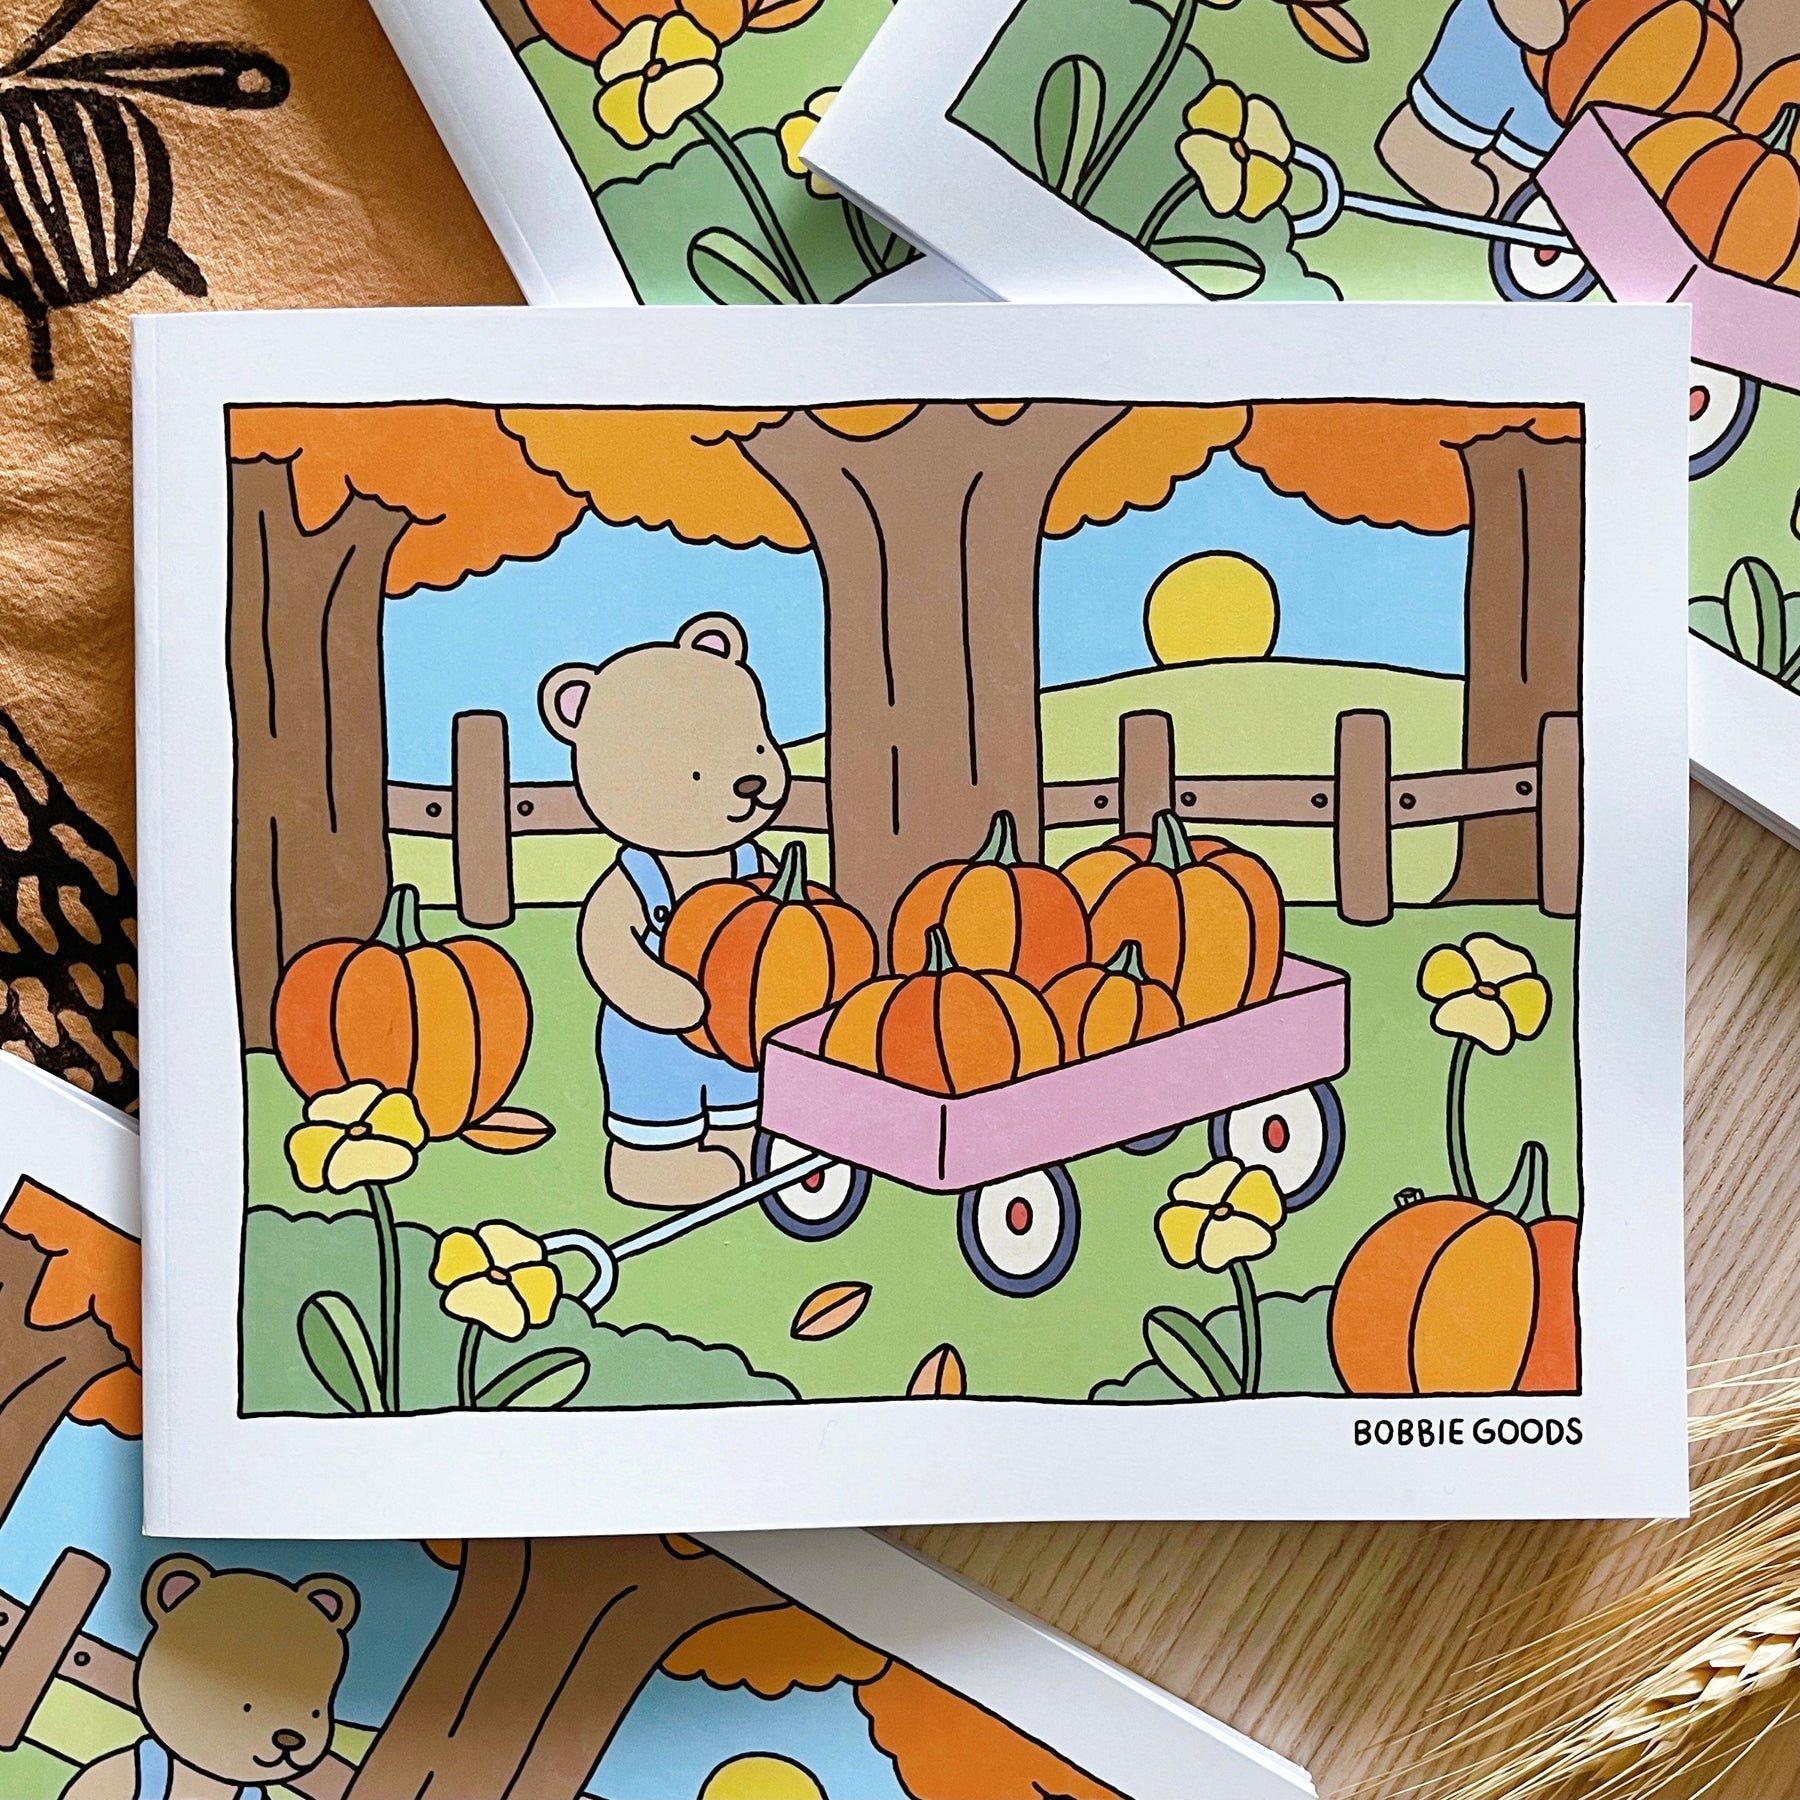 Completed Bobbie Goods Coloring Book - Fall/Winter 2022 Vol. 5 Flip through  with relaxing music! 